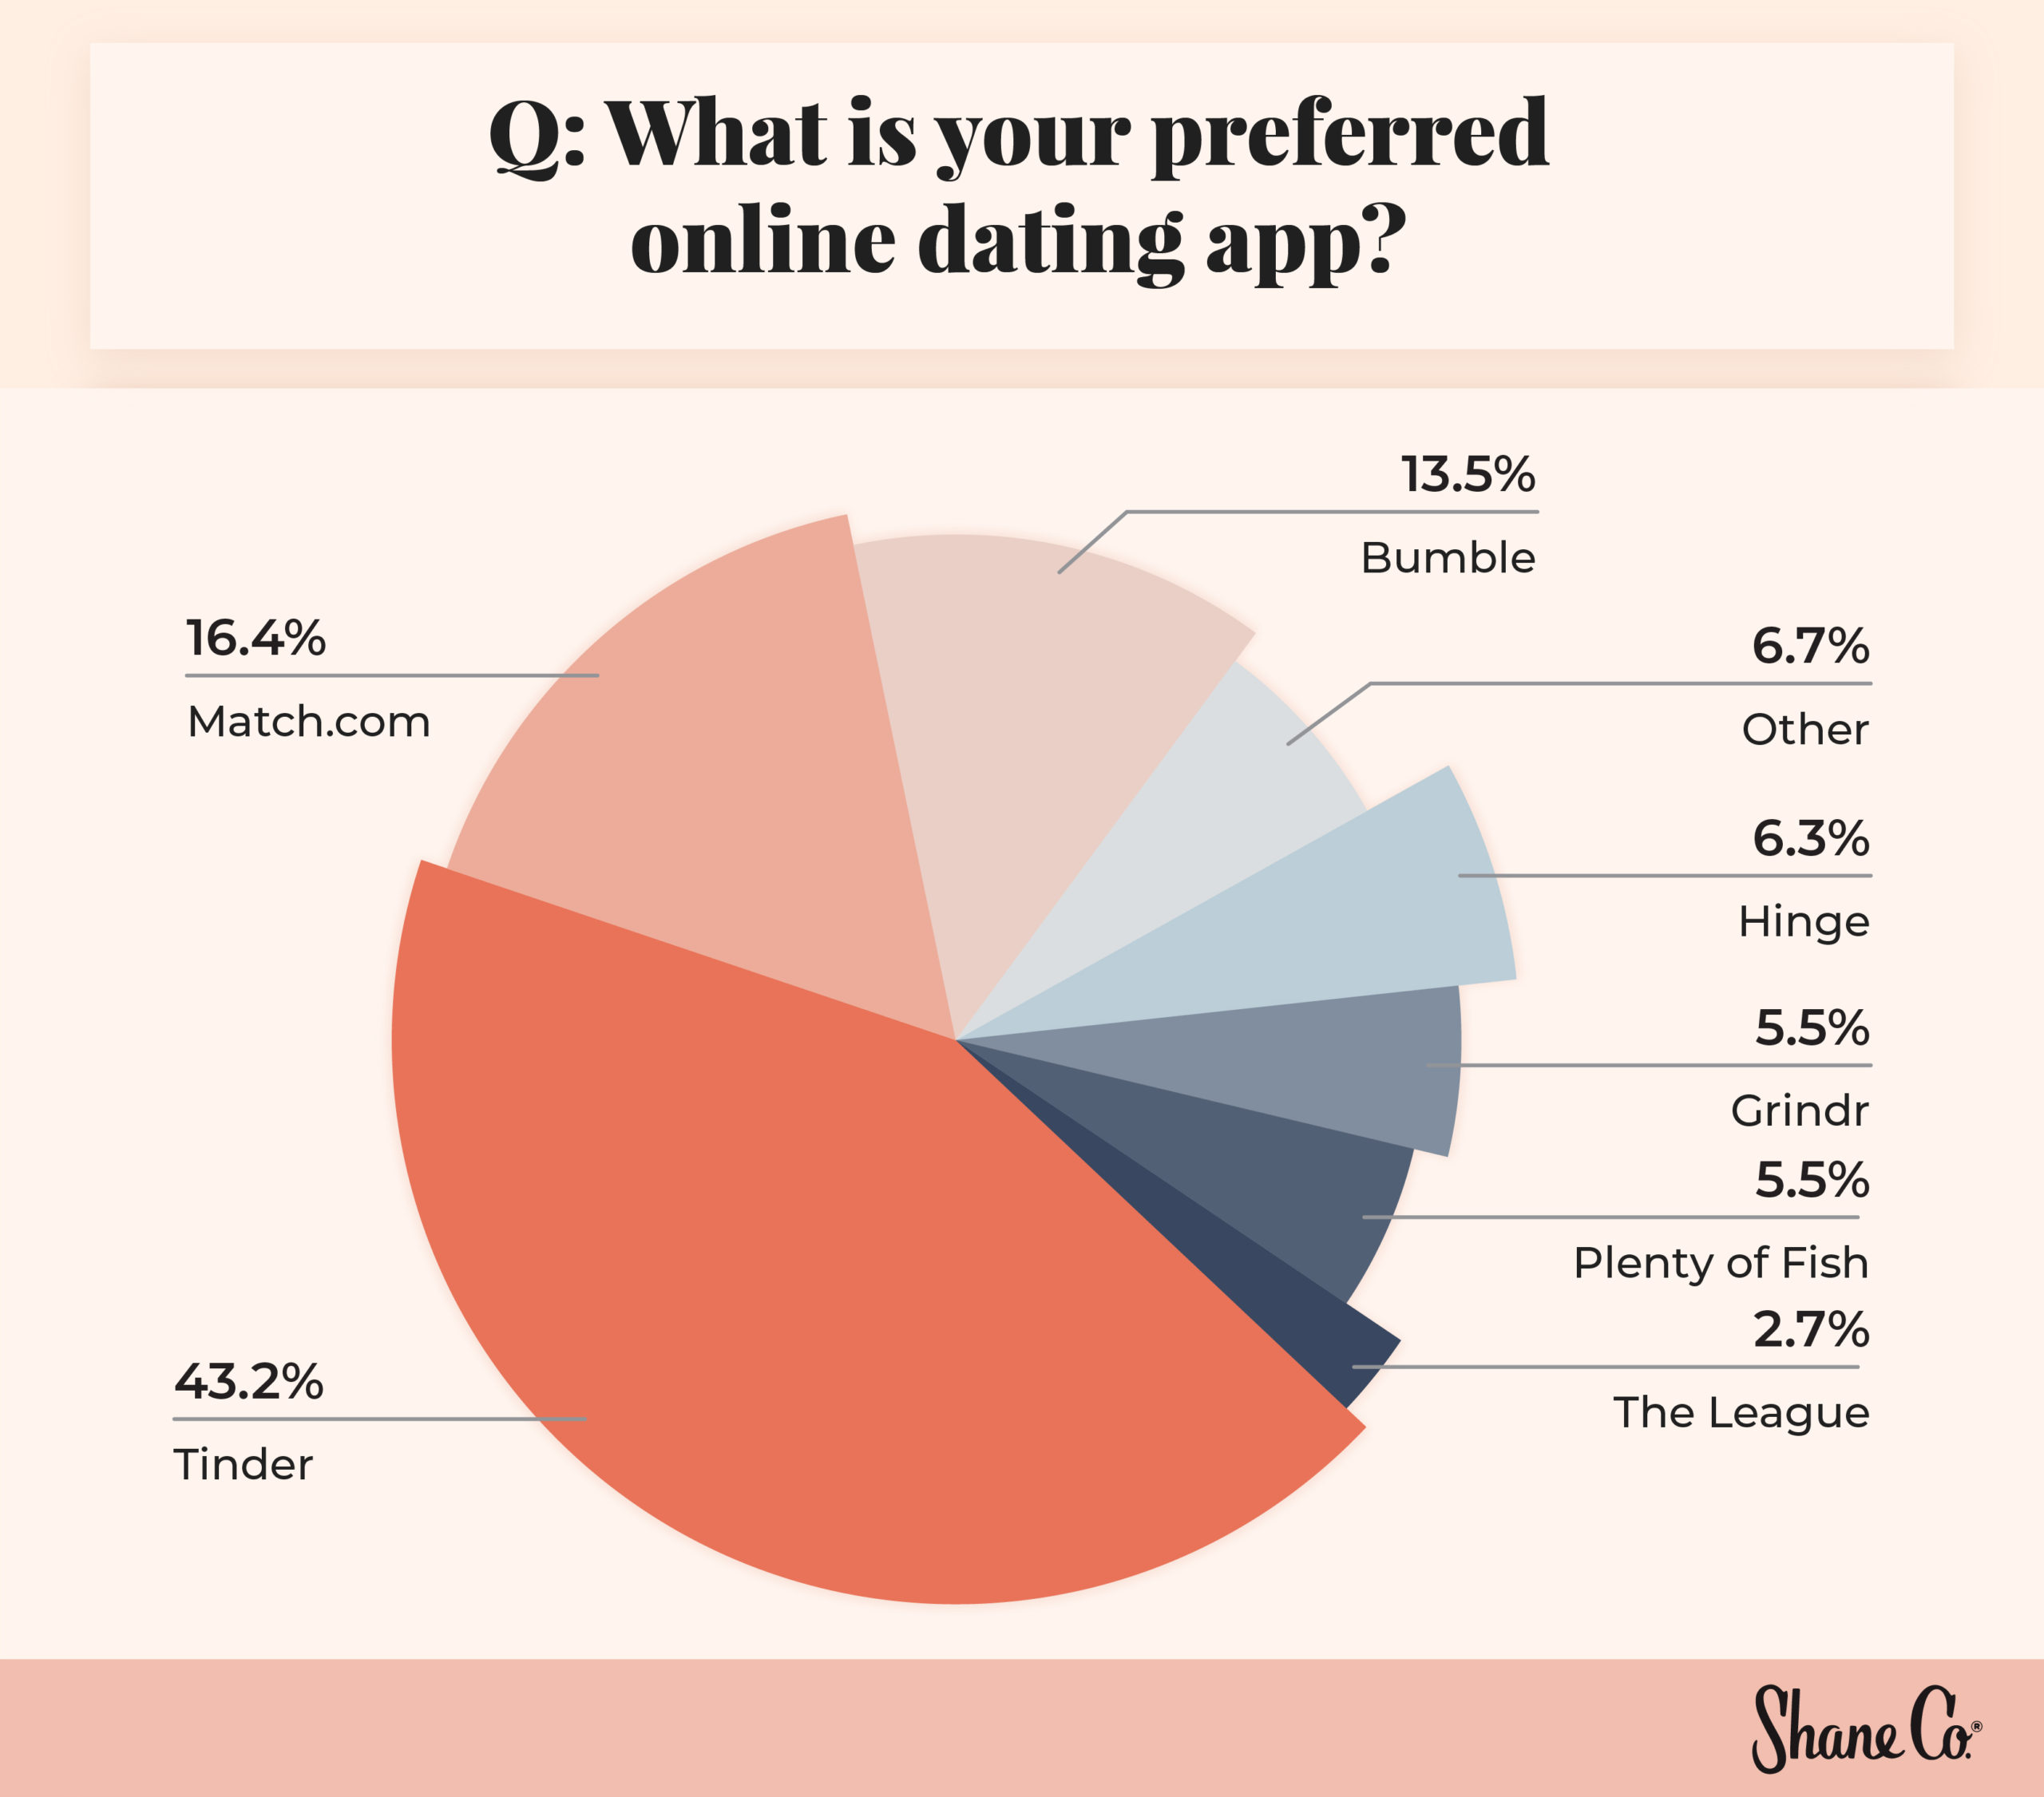 Pie chart showing preferred online dating apps.